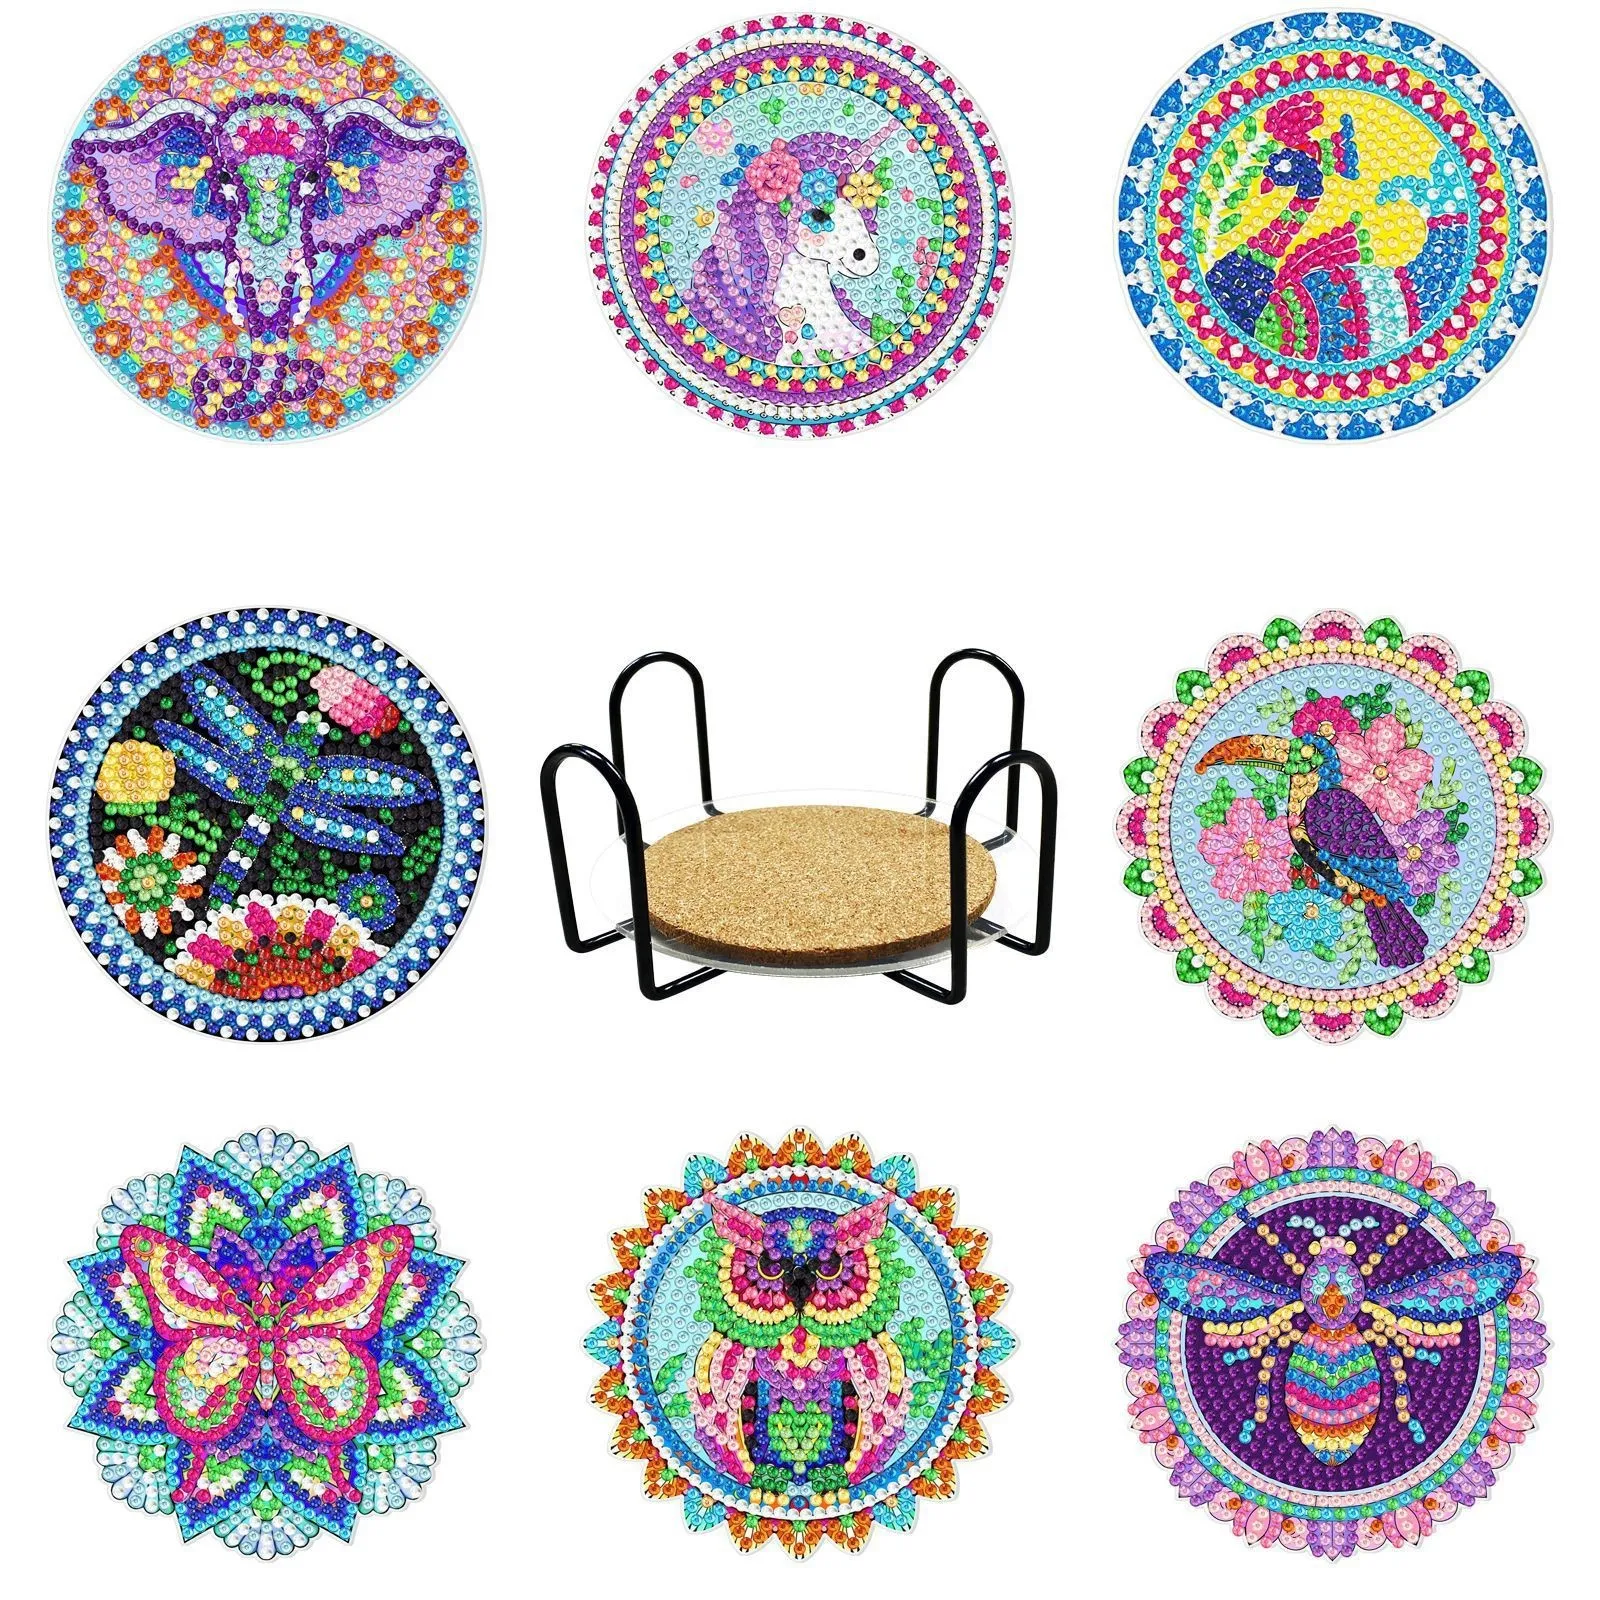 

RUOPOTY 8pc/Sets Diamond Painting Coasters Kits With Holder Bird Butterfly Animal Diamond Art Kits For Adults Kids Home Decors